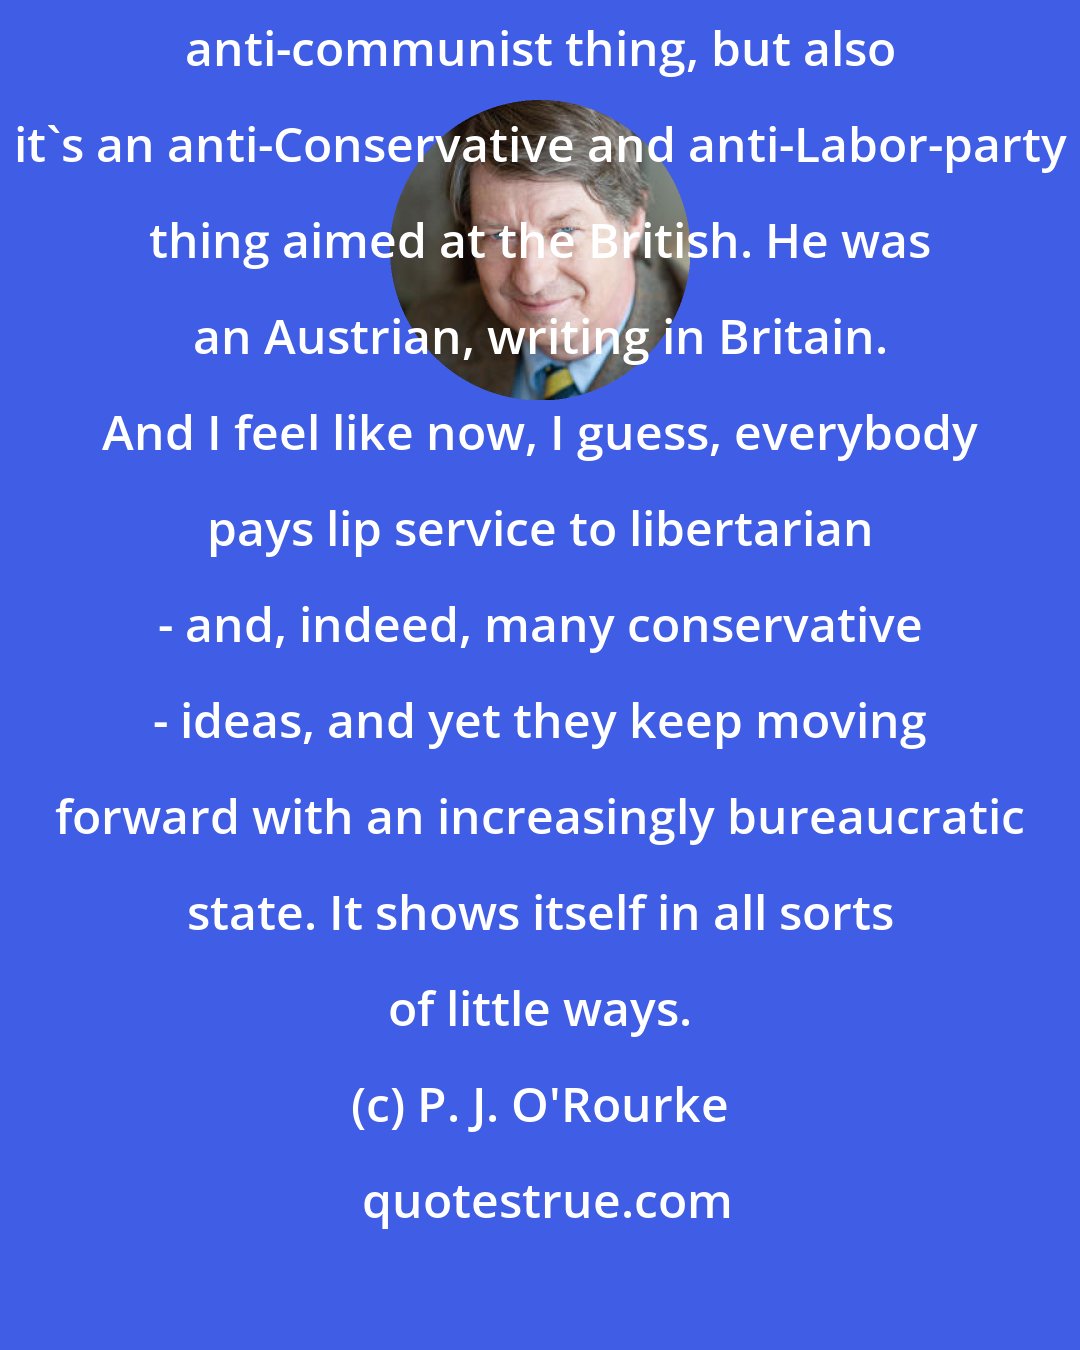 P. J. O'Rourke: The Road To Serfdom was written during WWII, and basically it's an anti-Nazi, anti-communist thing, but also it's an anti-Conservative and anti-Labor-party thing aimed at the British. He was an Austrian, writing in Britain. And I feel like now, I guess, everybody pays lip service to libertarian - and, indeed, many conservative - ideas, and yet they keep moving forward with an increasingly bureaucratic state. It shows itself in all sorts of little ways.